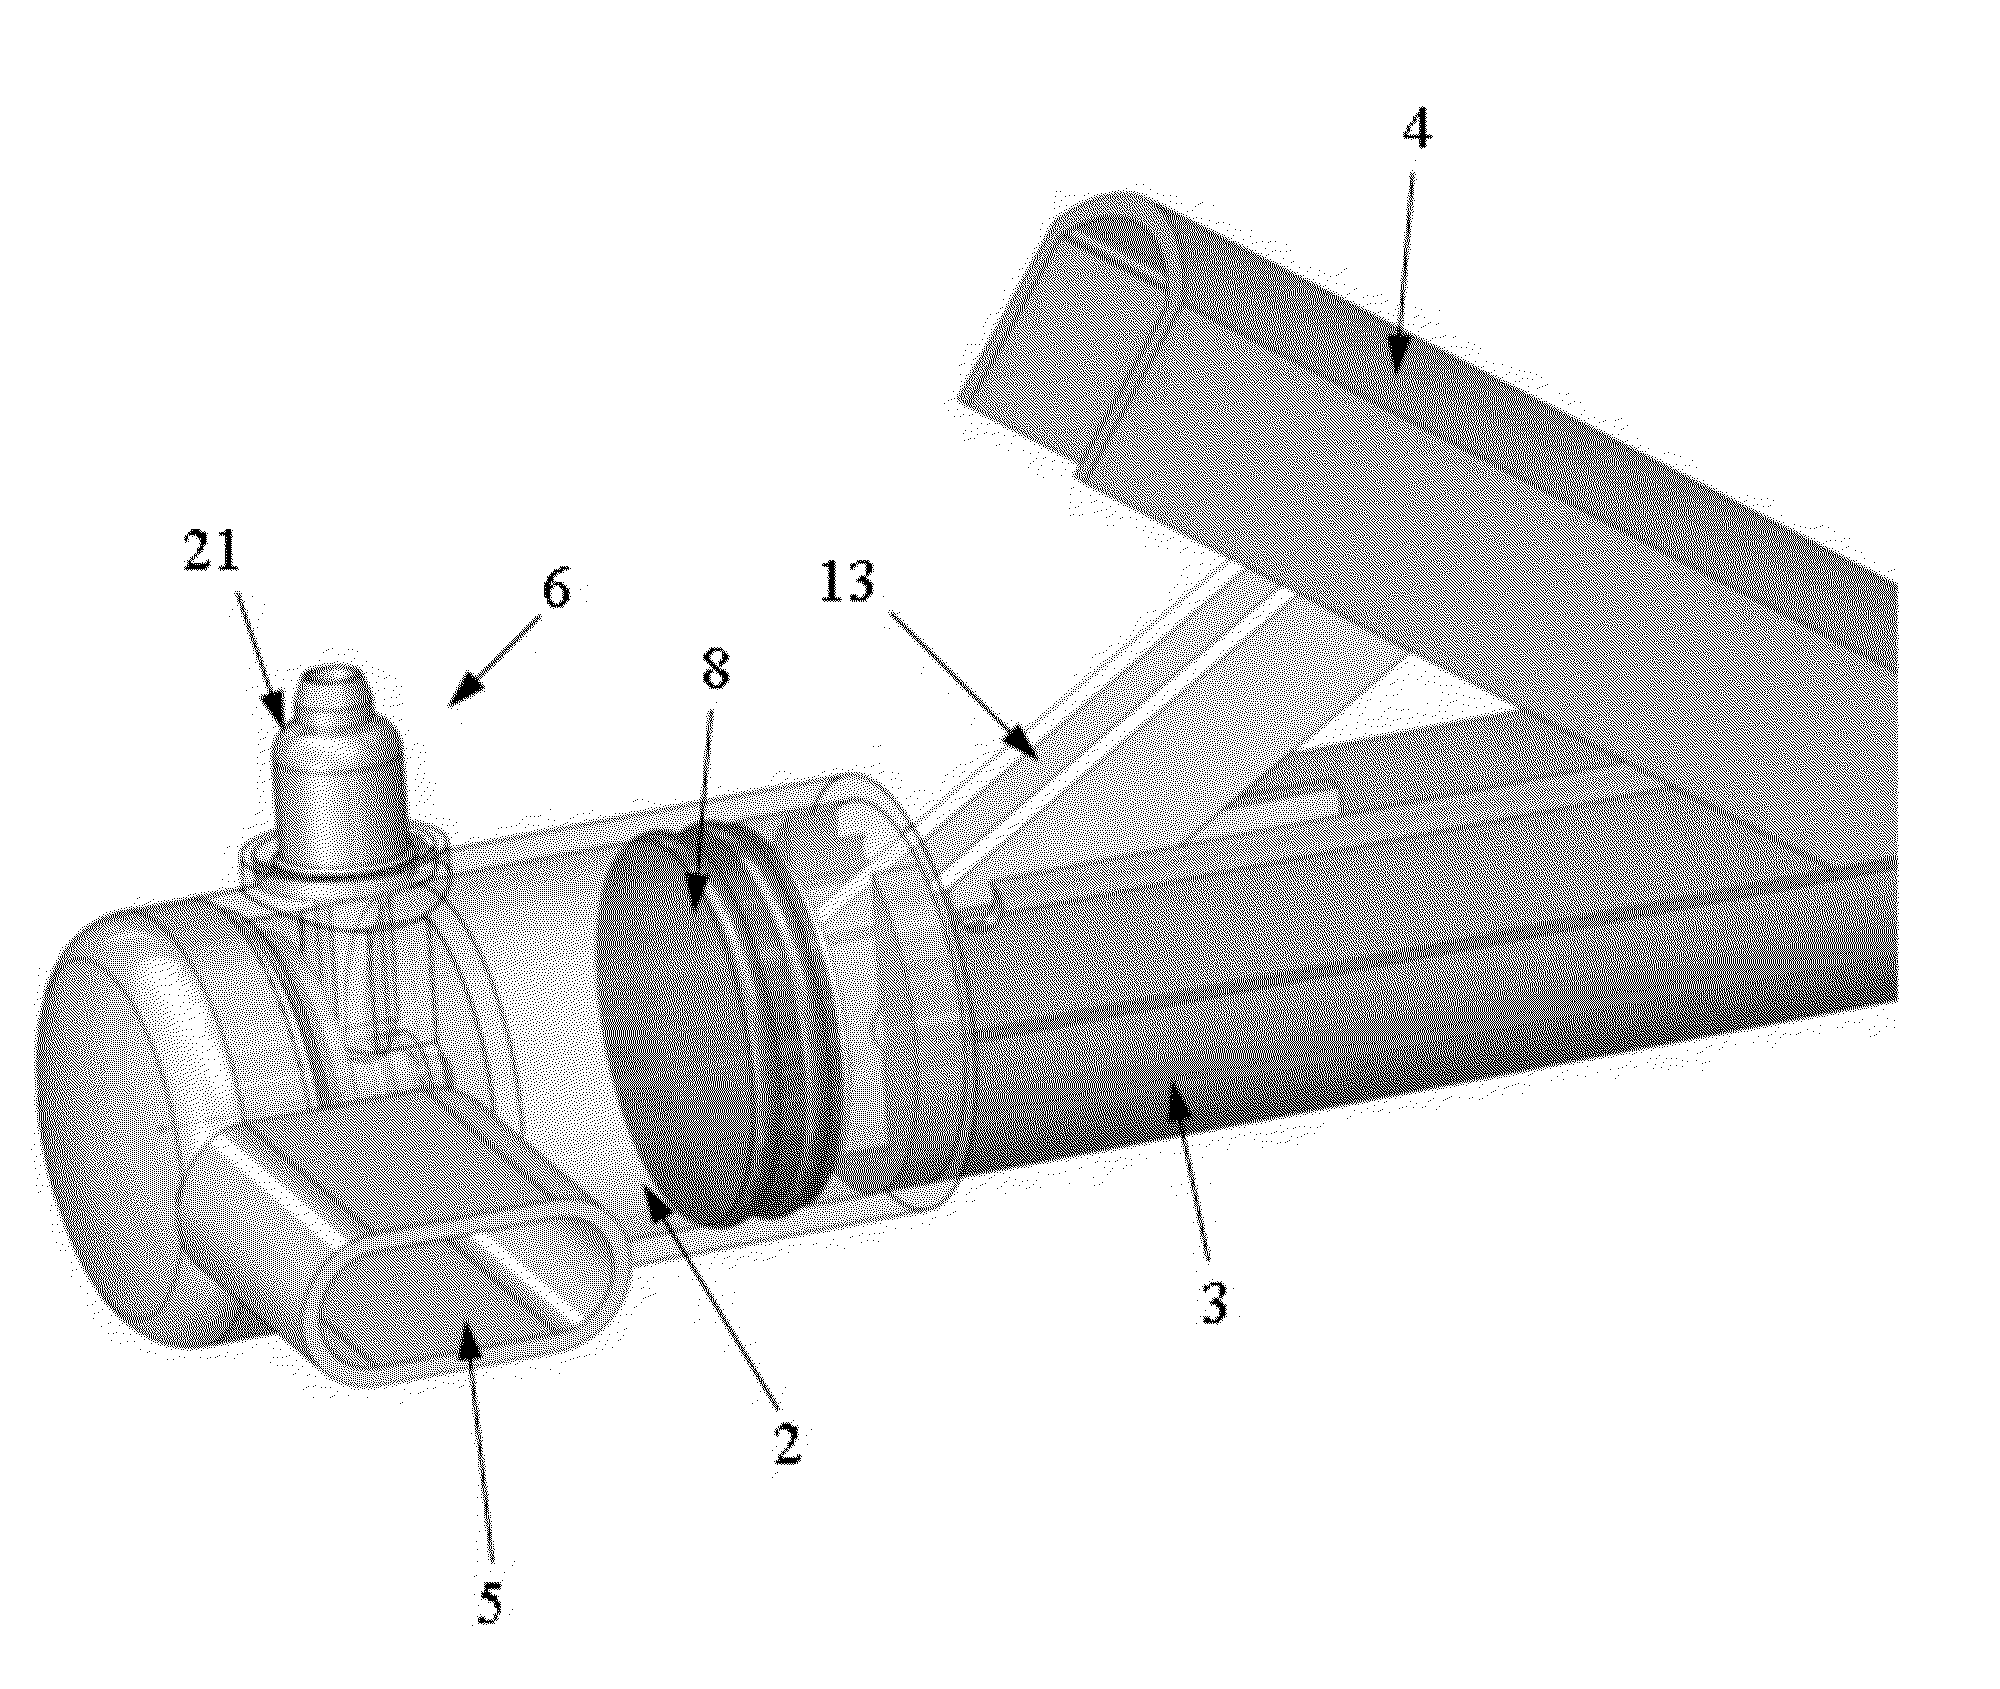 Device and method for aerosolized delivering of substance to a natural orifice of the body